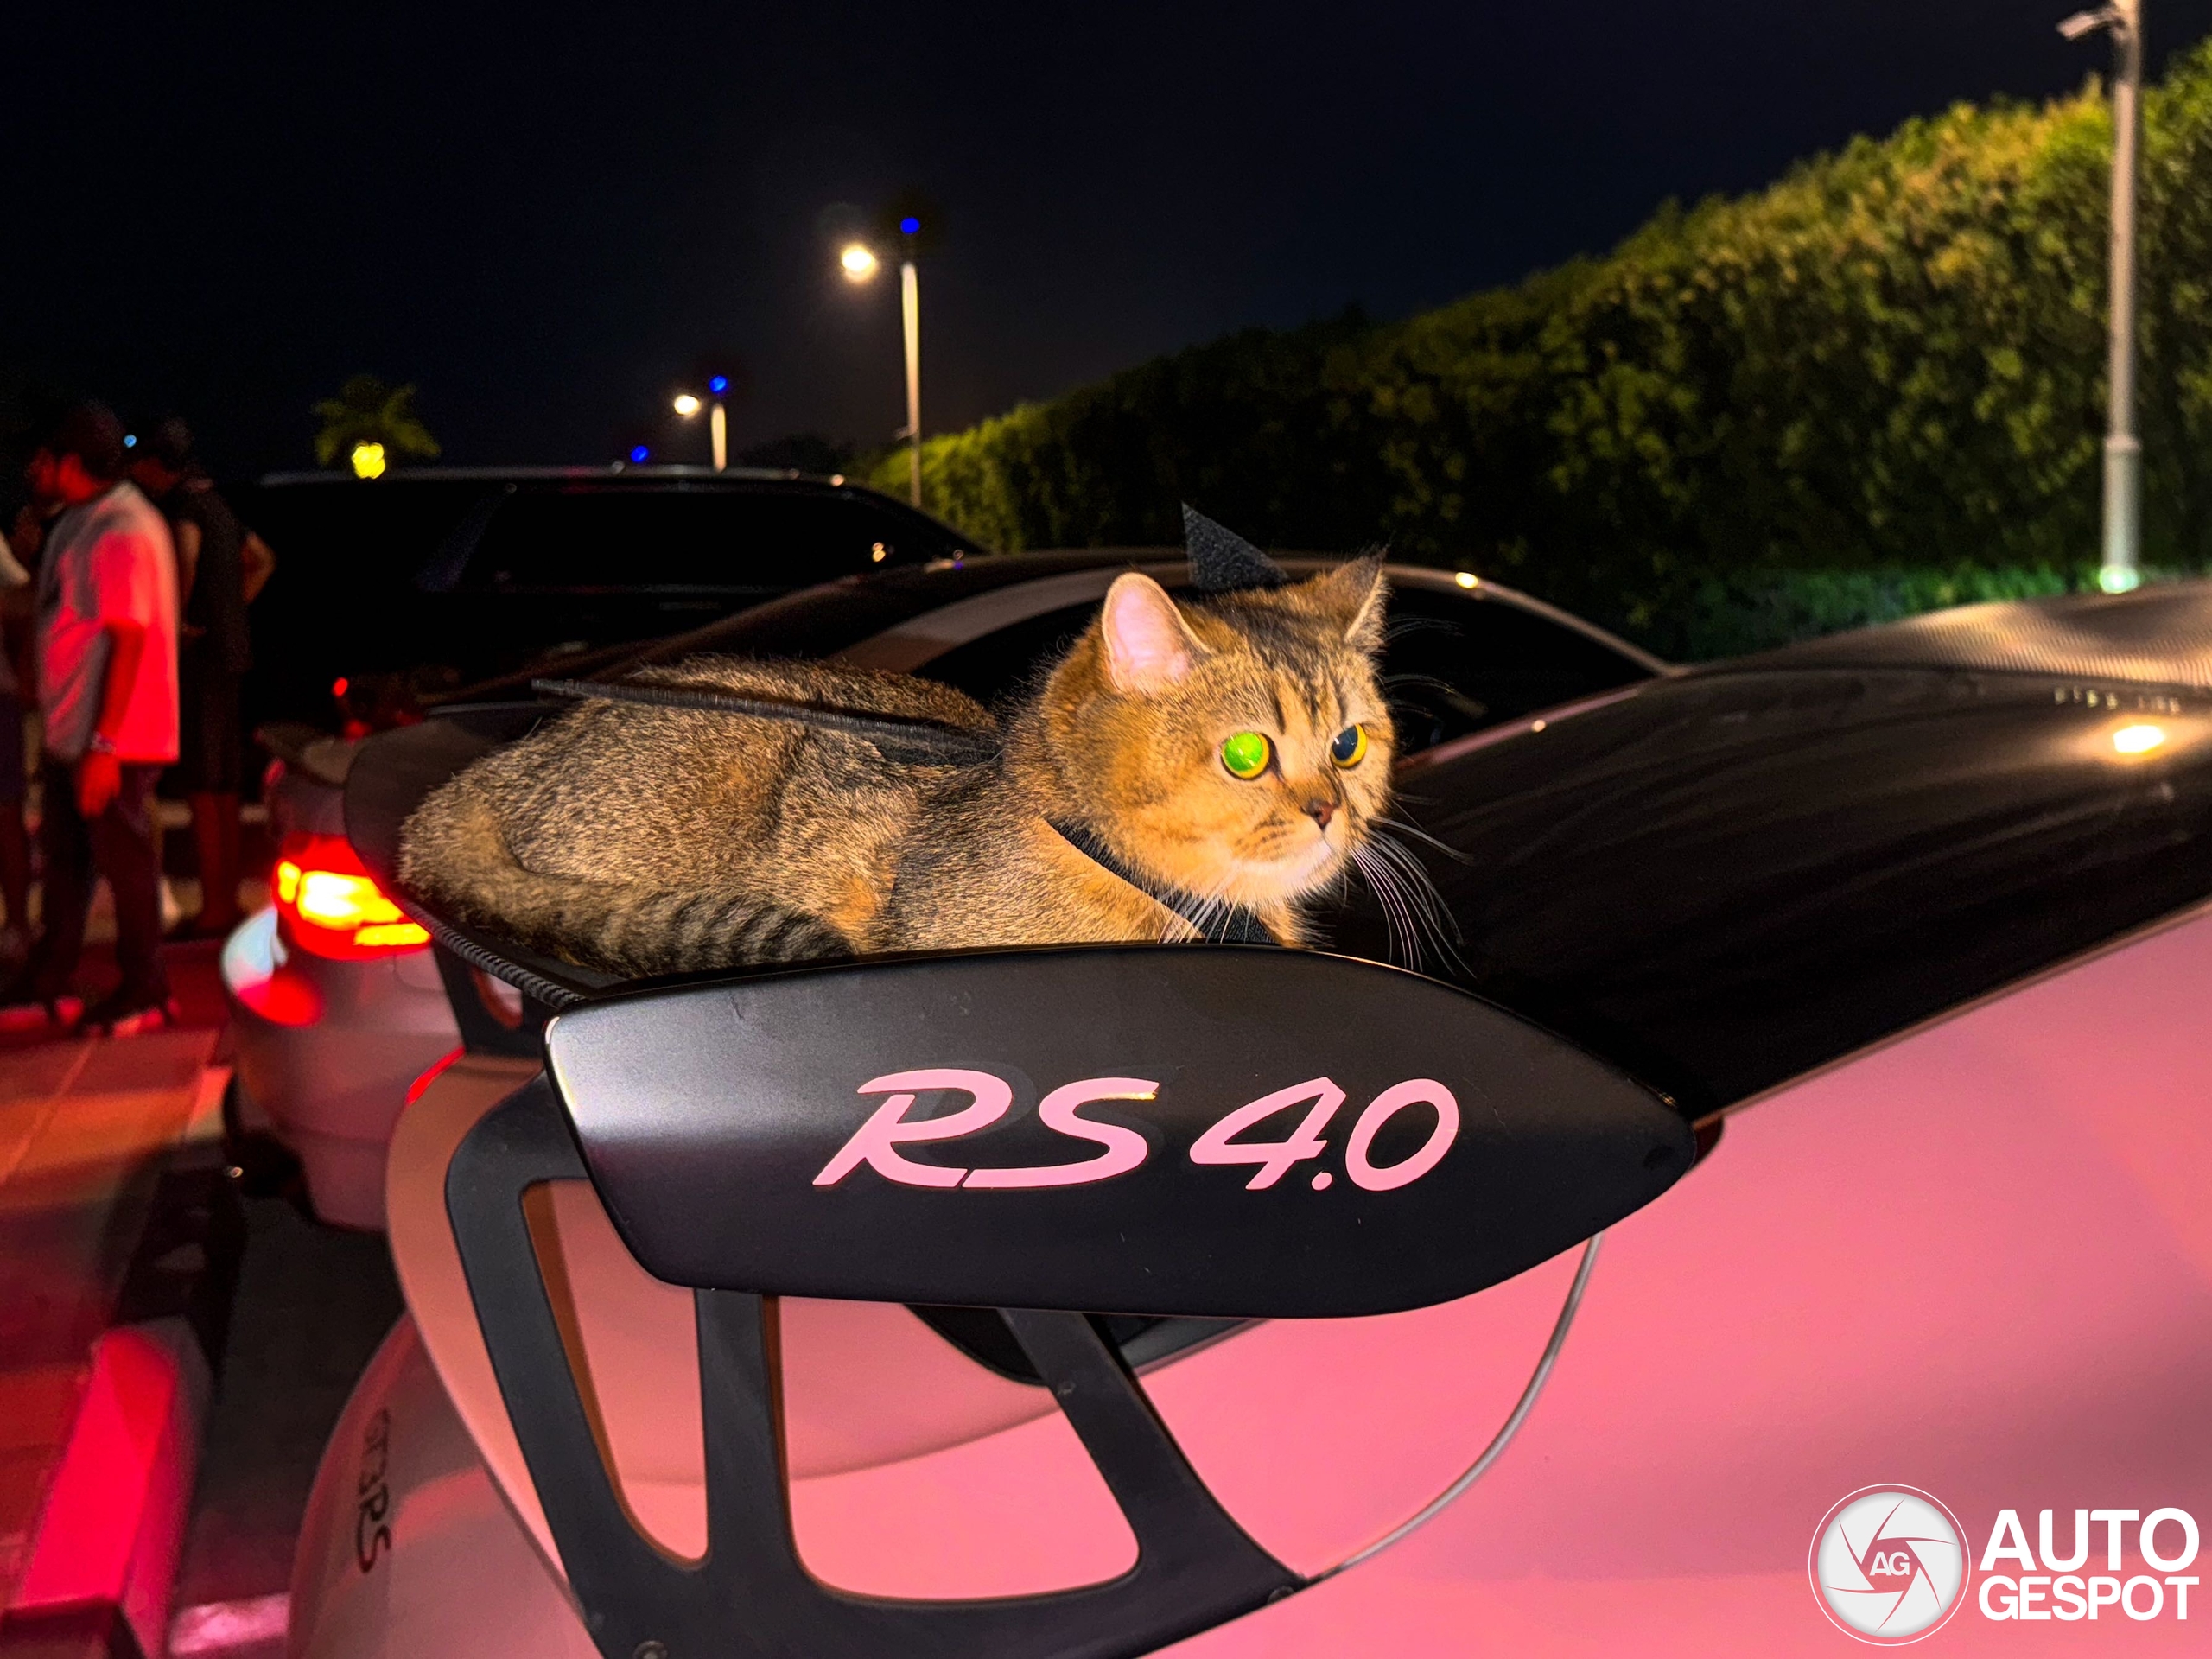 Cats lead a life of luxury in Dubai